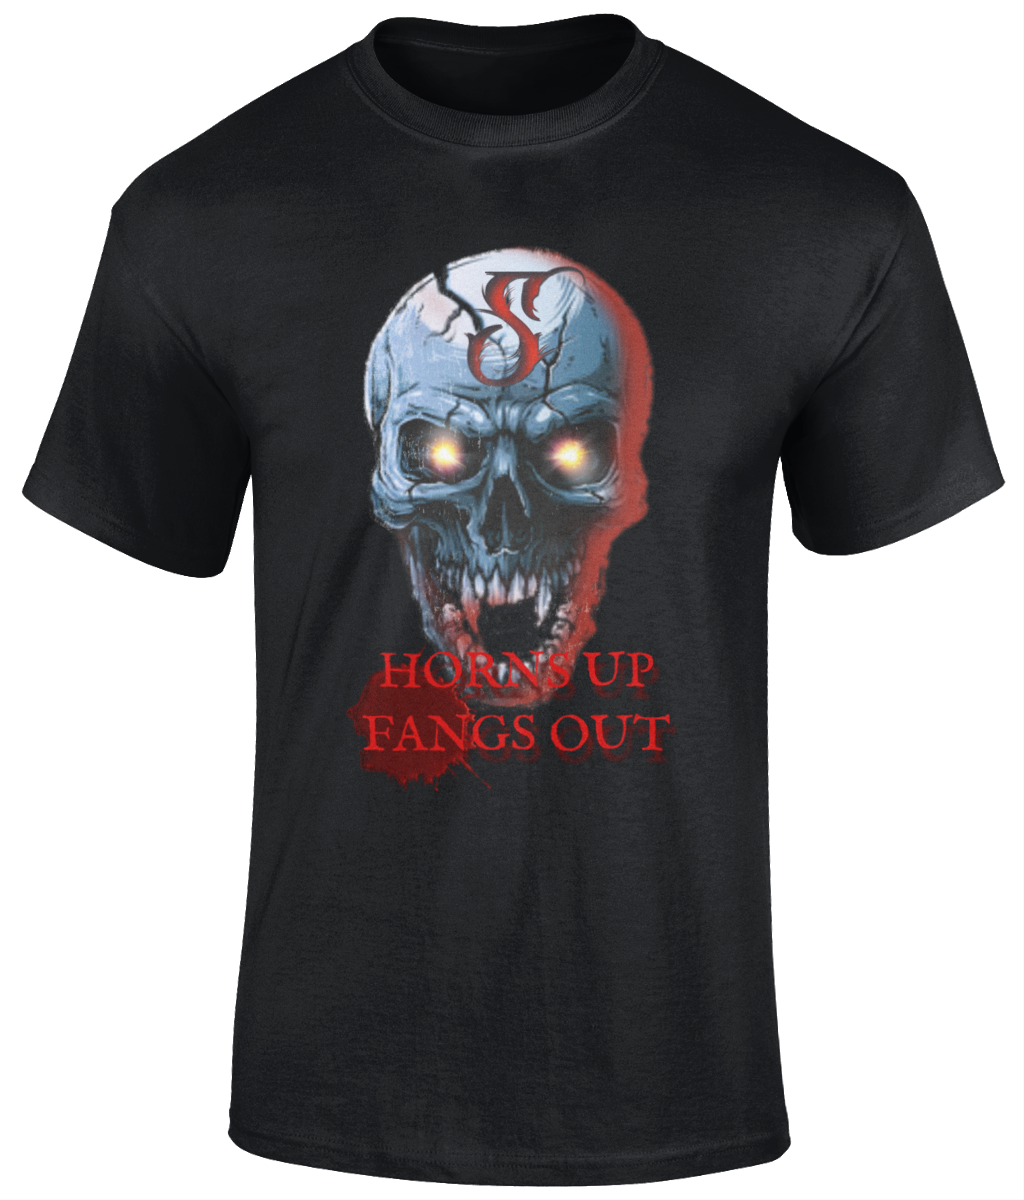 We are pleased to have the official SINSATION shirt "HORNS UP FANGS OUT!"  Material: 100% cotton.  Seamless twin needle collar. Taped neck and shoulders. Tubular body. Twin needle sleeves and hem. Black Sizes small to 5XL Support the US Vampire rock band!